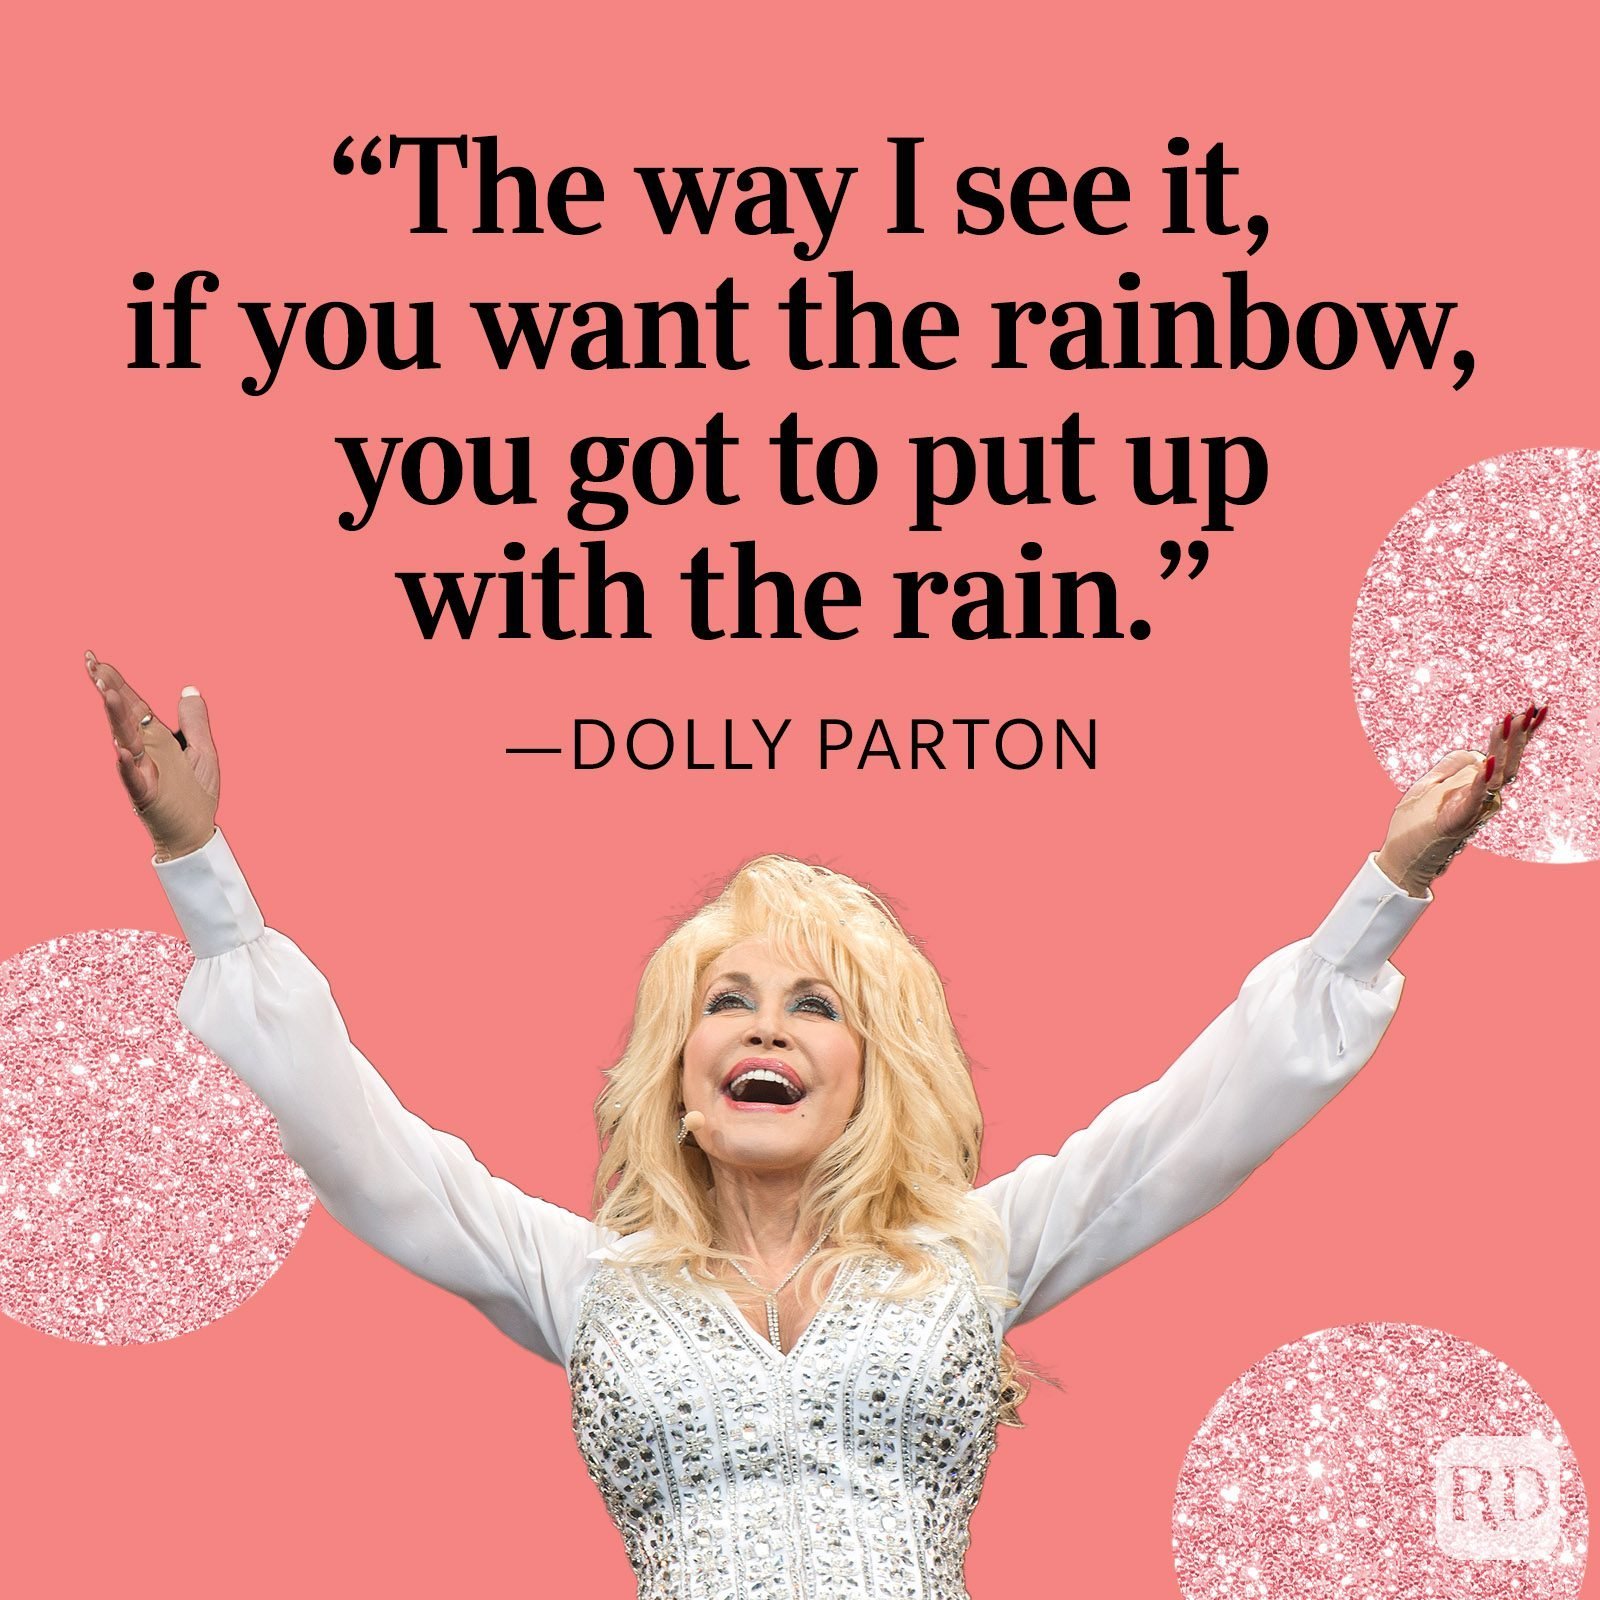 30 Dolly Parton Quotes That Are Sure to Make You Smile